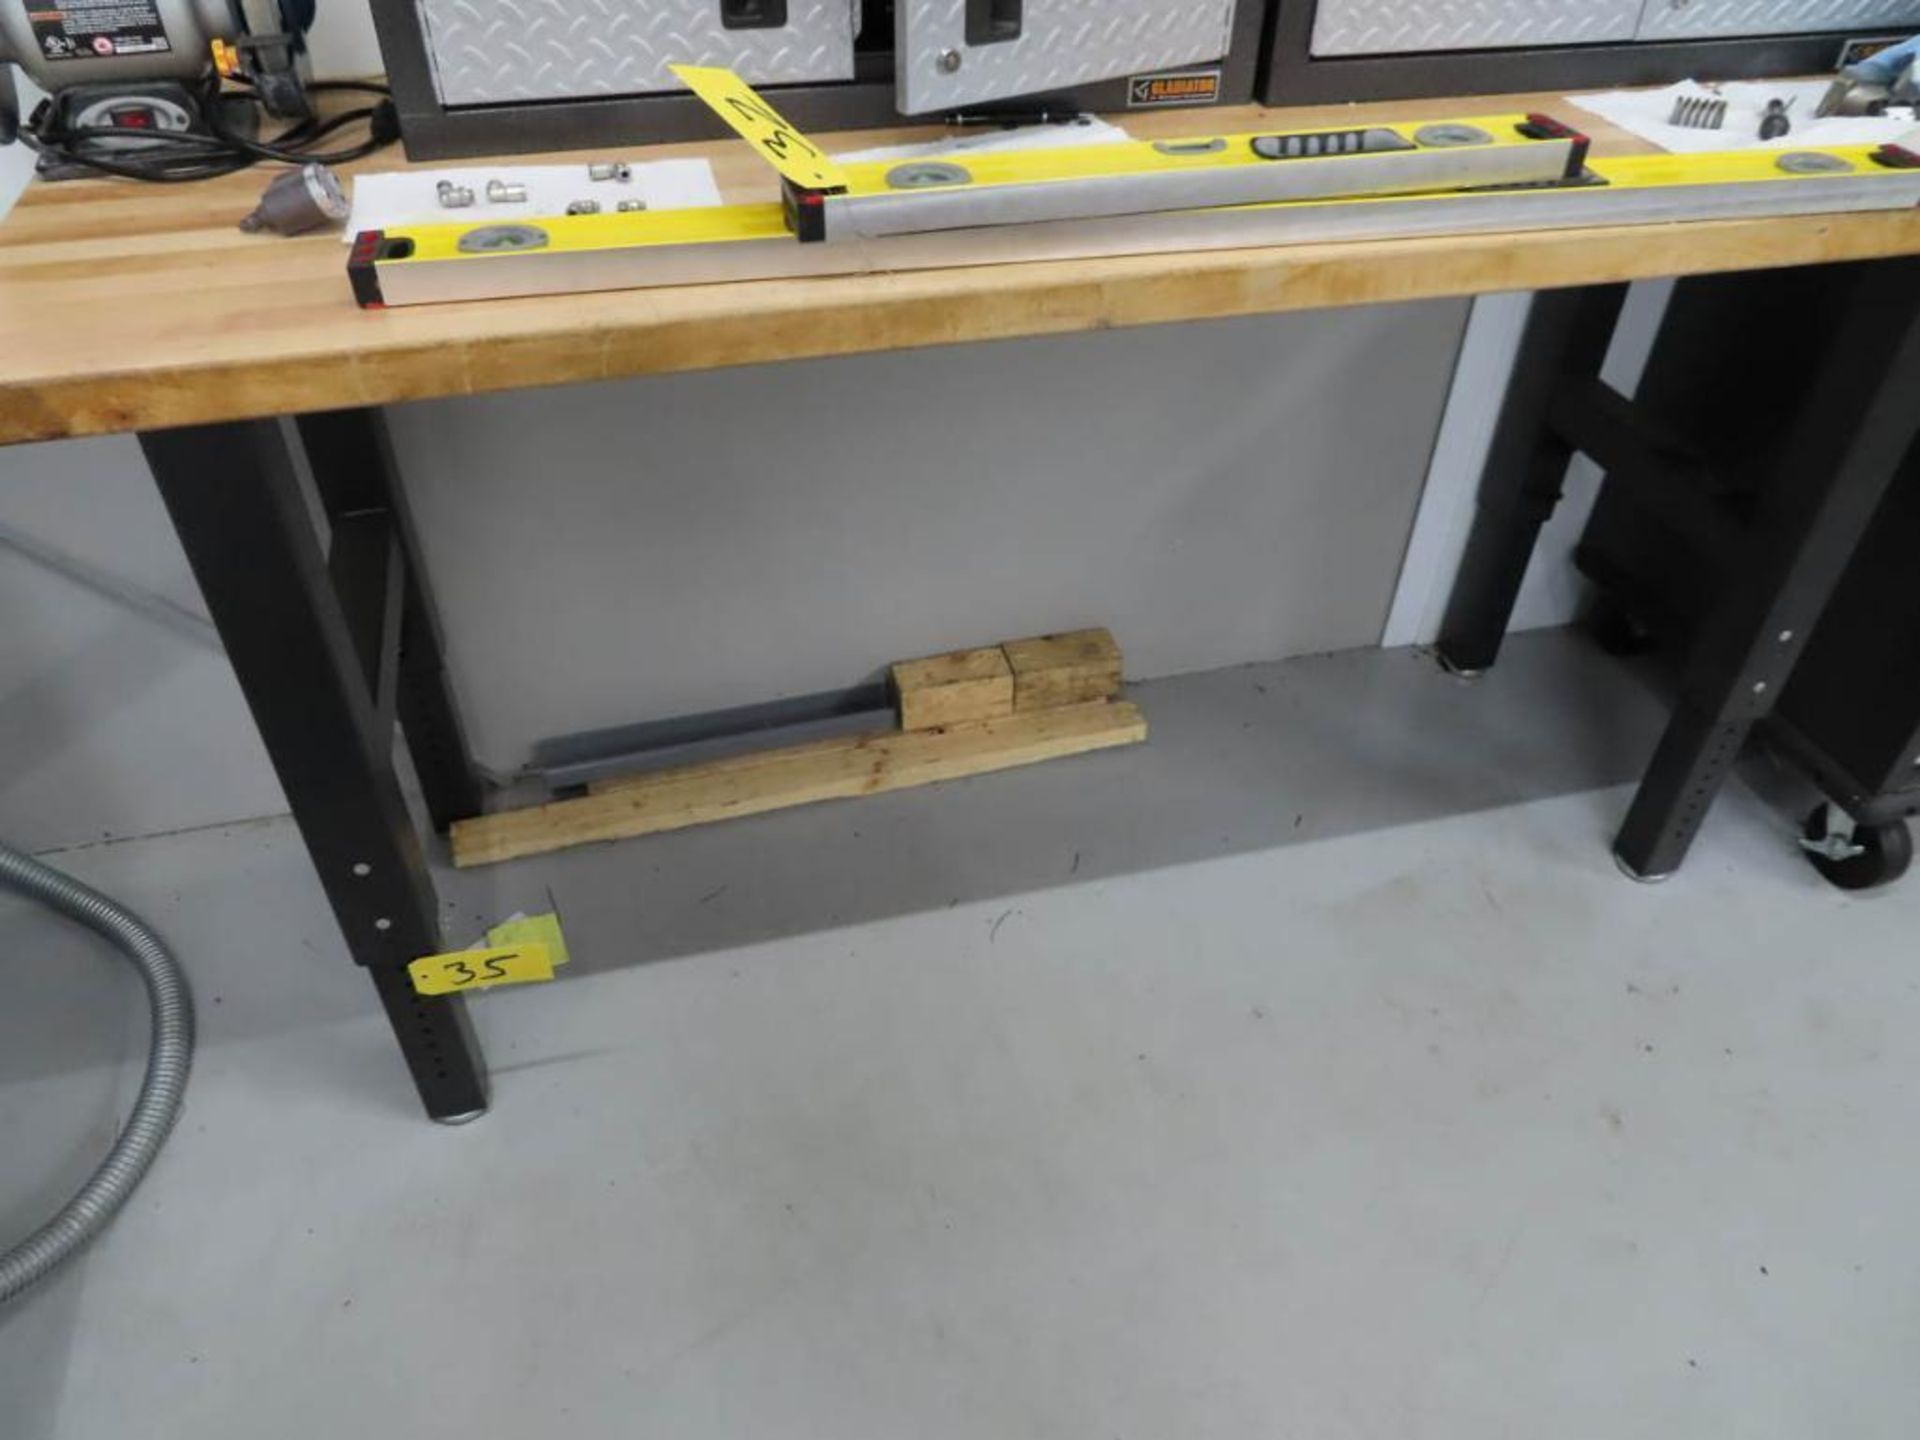 Gladiator Wood Top Work Bench 25" X 72" (No Contents)